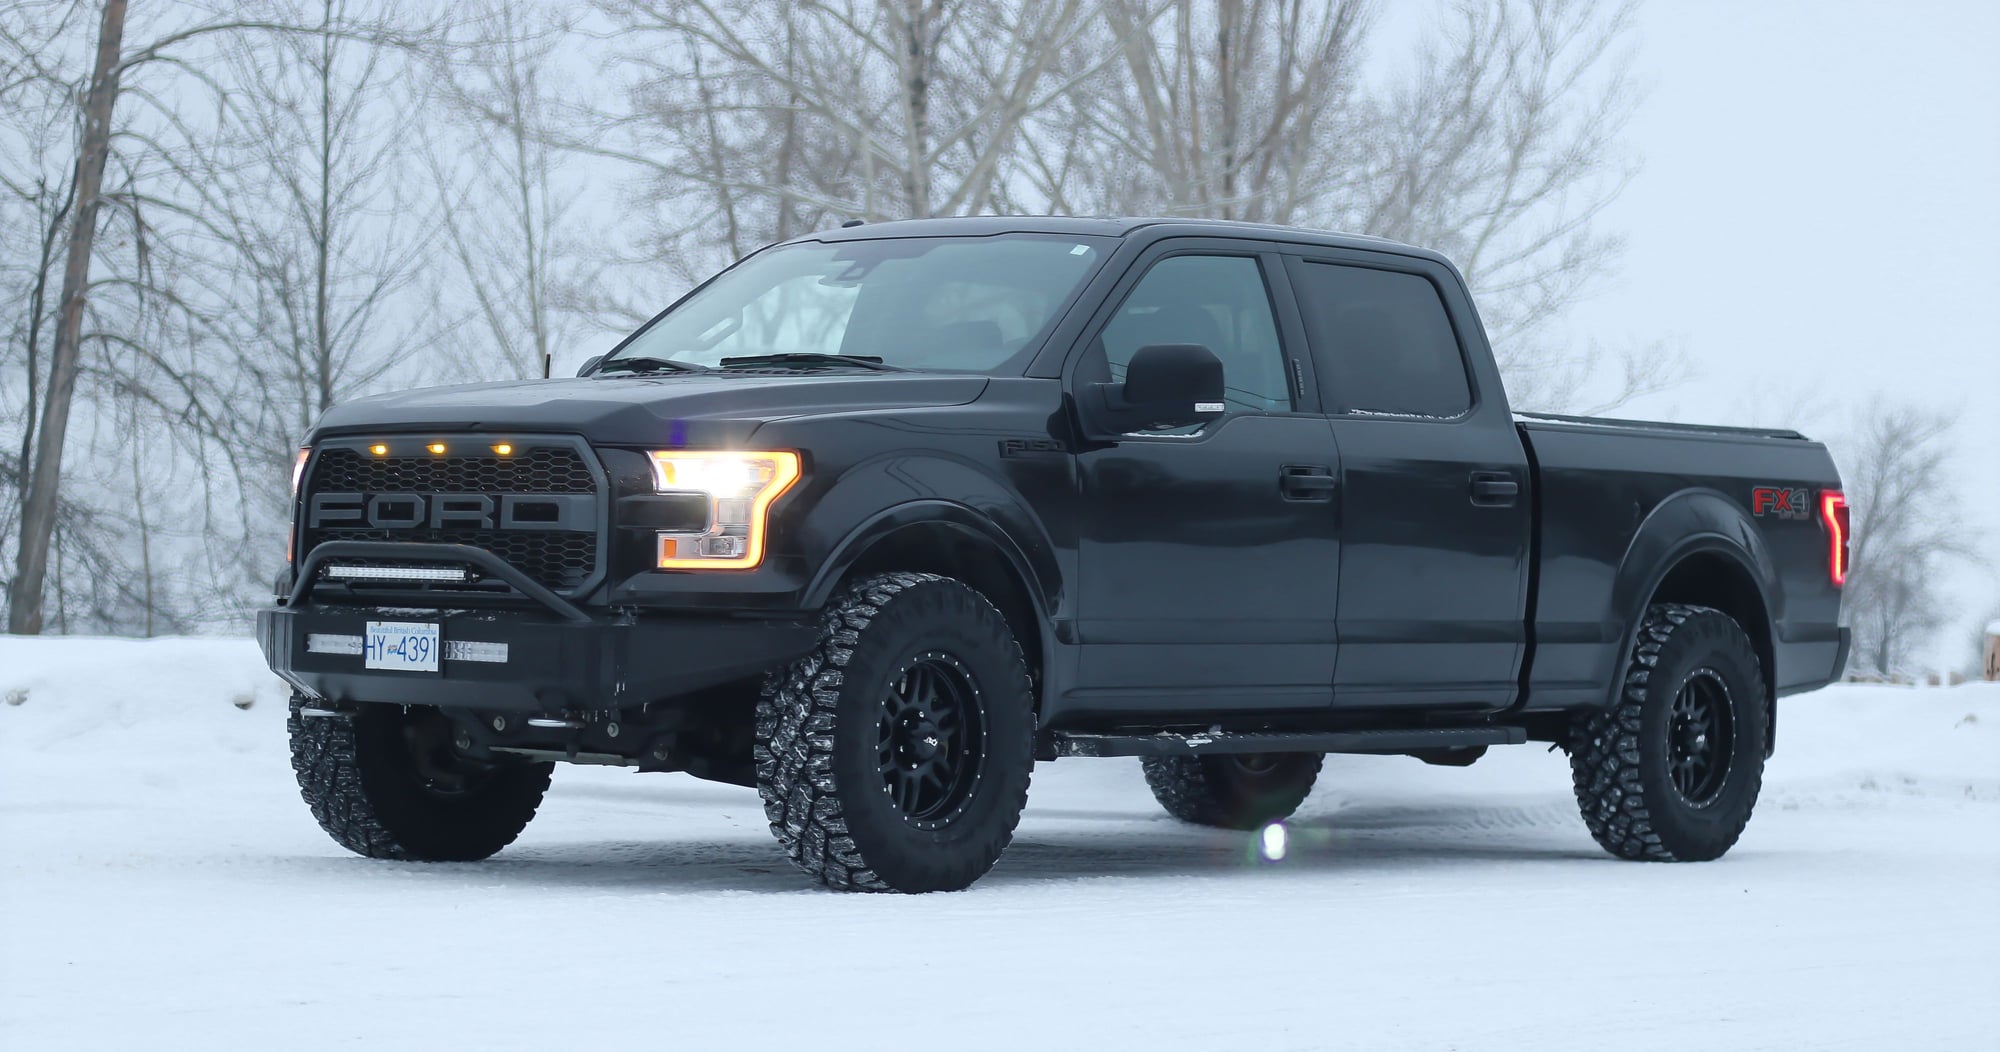 2015 F150 Strictly Pics Thread - Page 311 - Ford F150 Forum - Community ...